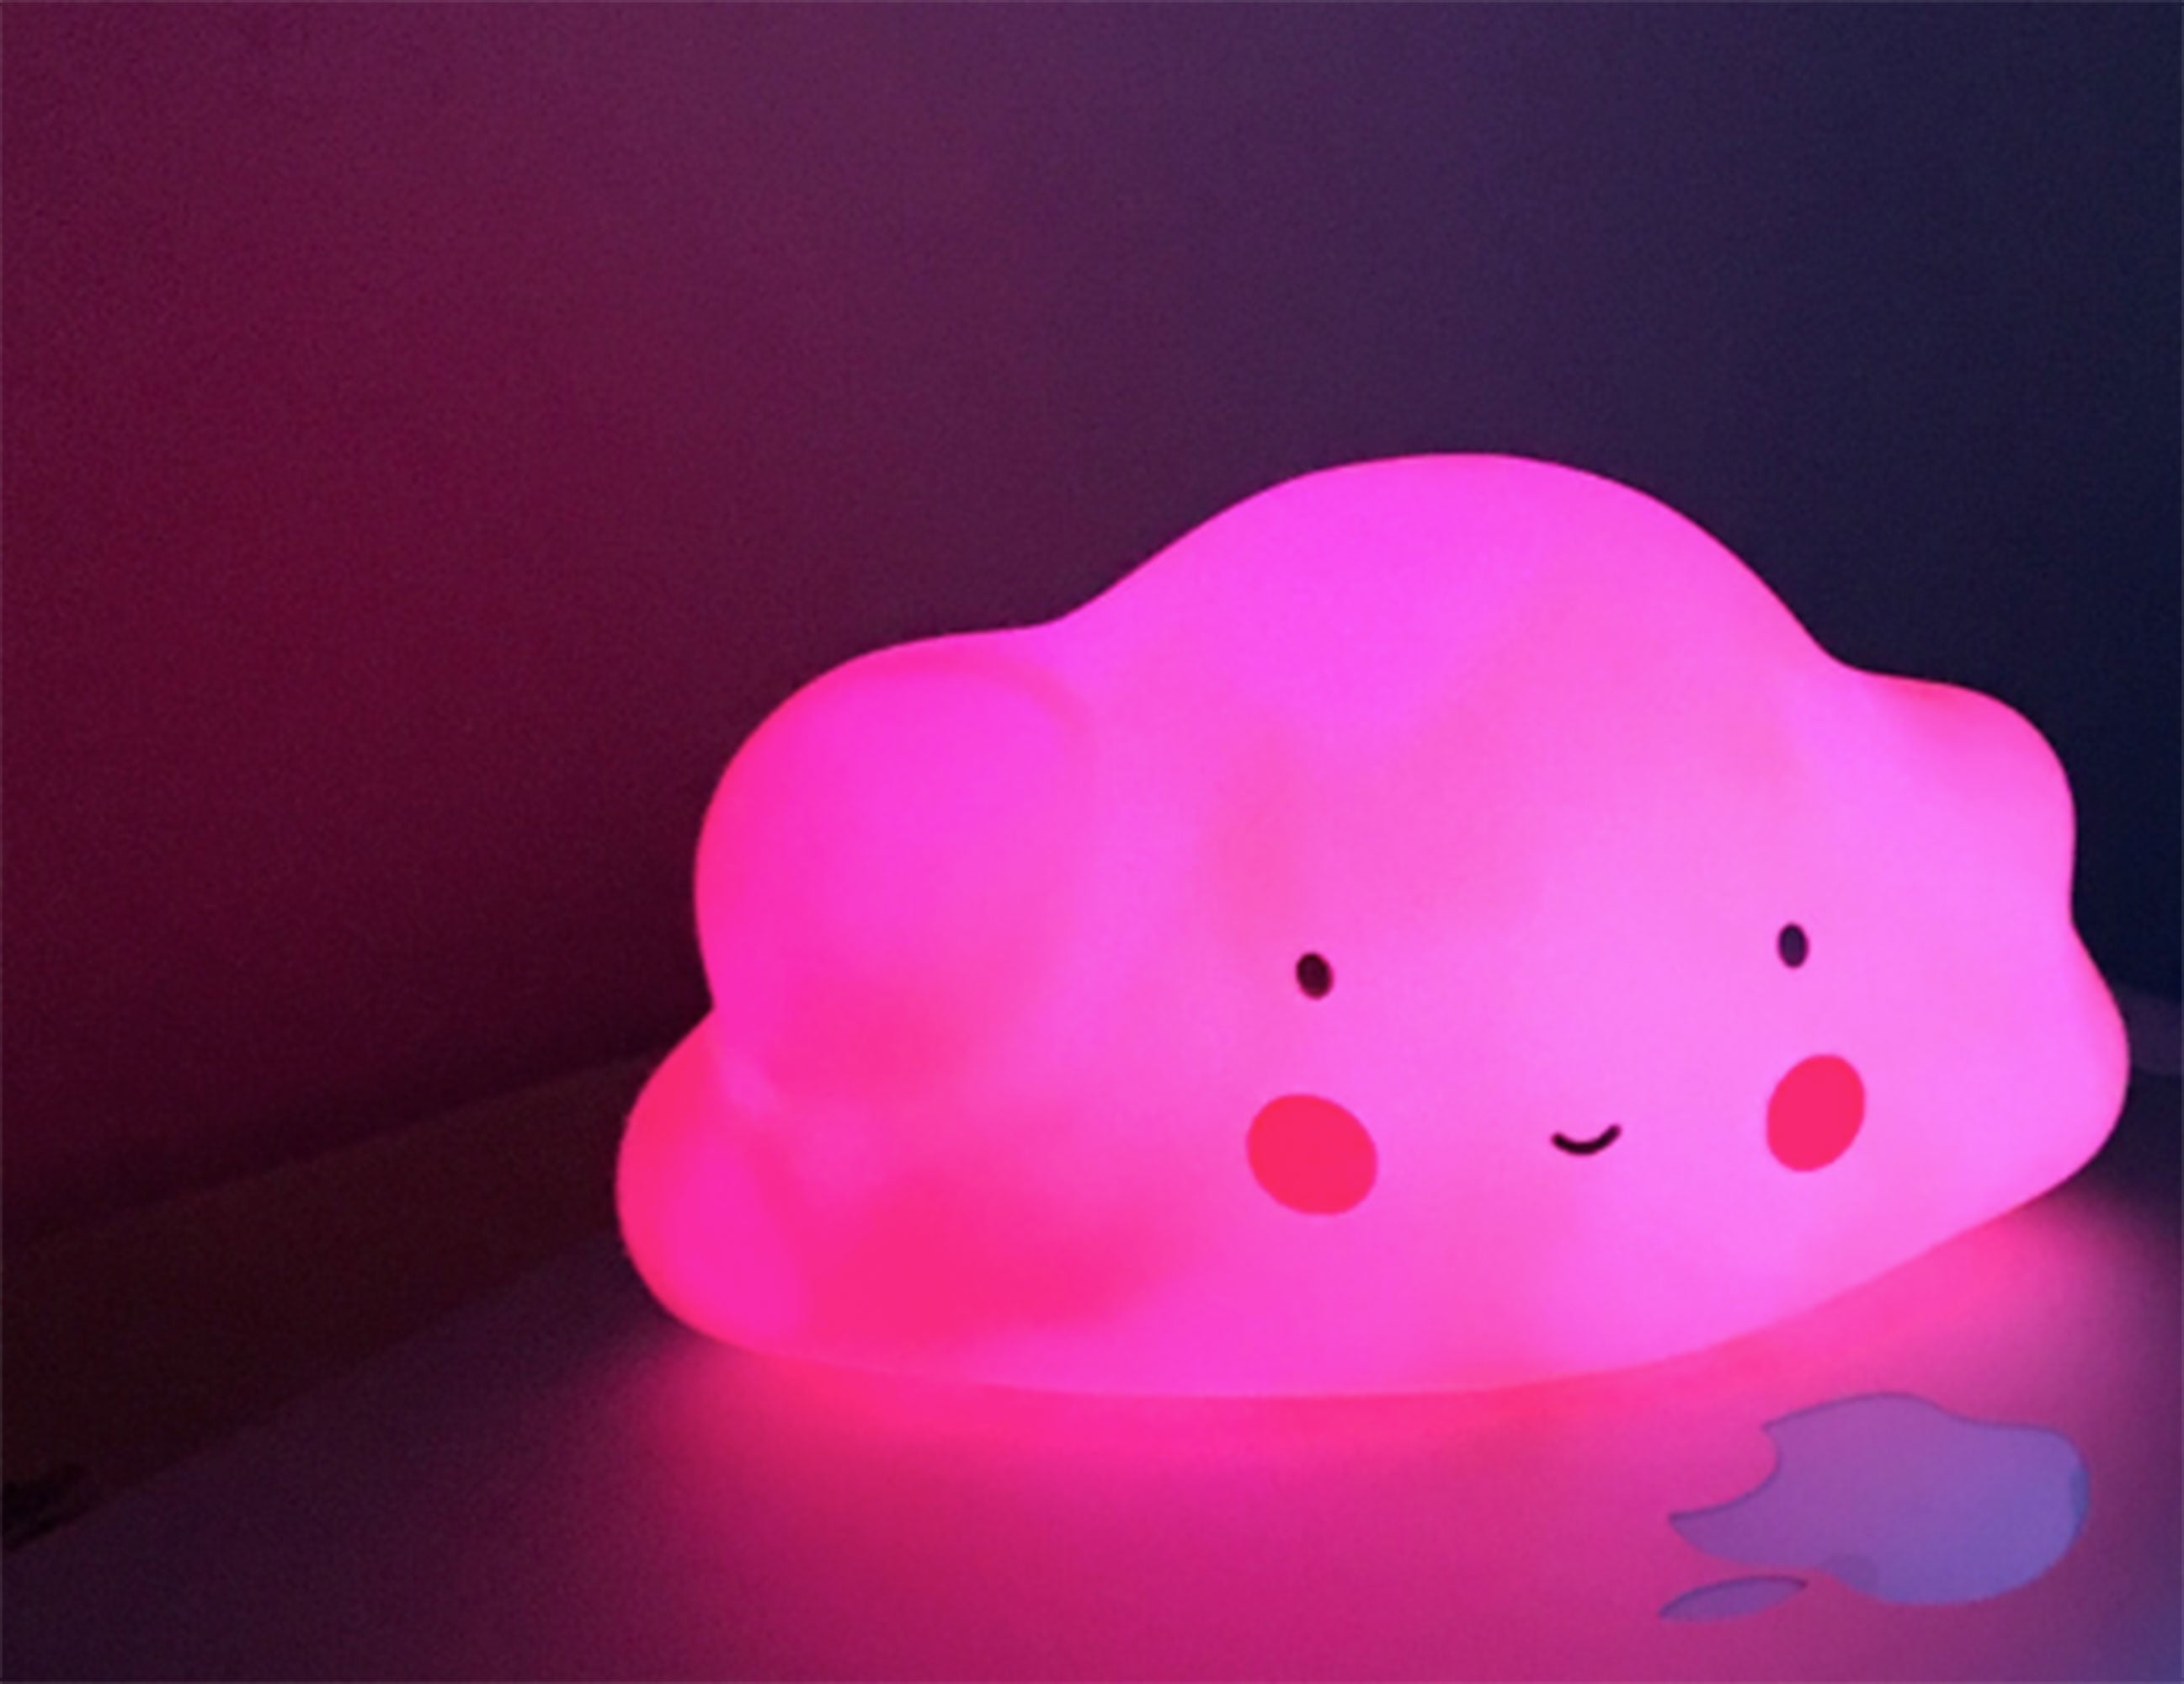 Soft Cloud Light (Pink). Great for Kids' room, night light, center piece, on/off Size: 3.25x6x3.25. Squeezable material. Night light for any room. On/Off on the bottom - Walmart.com